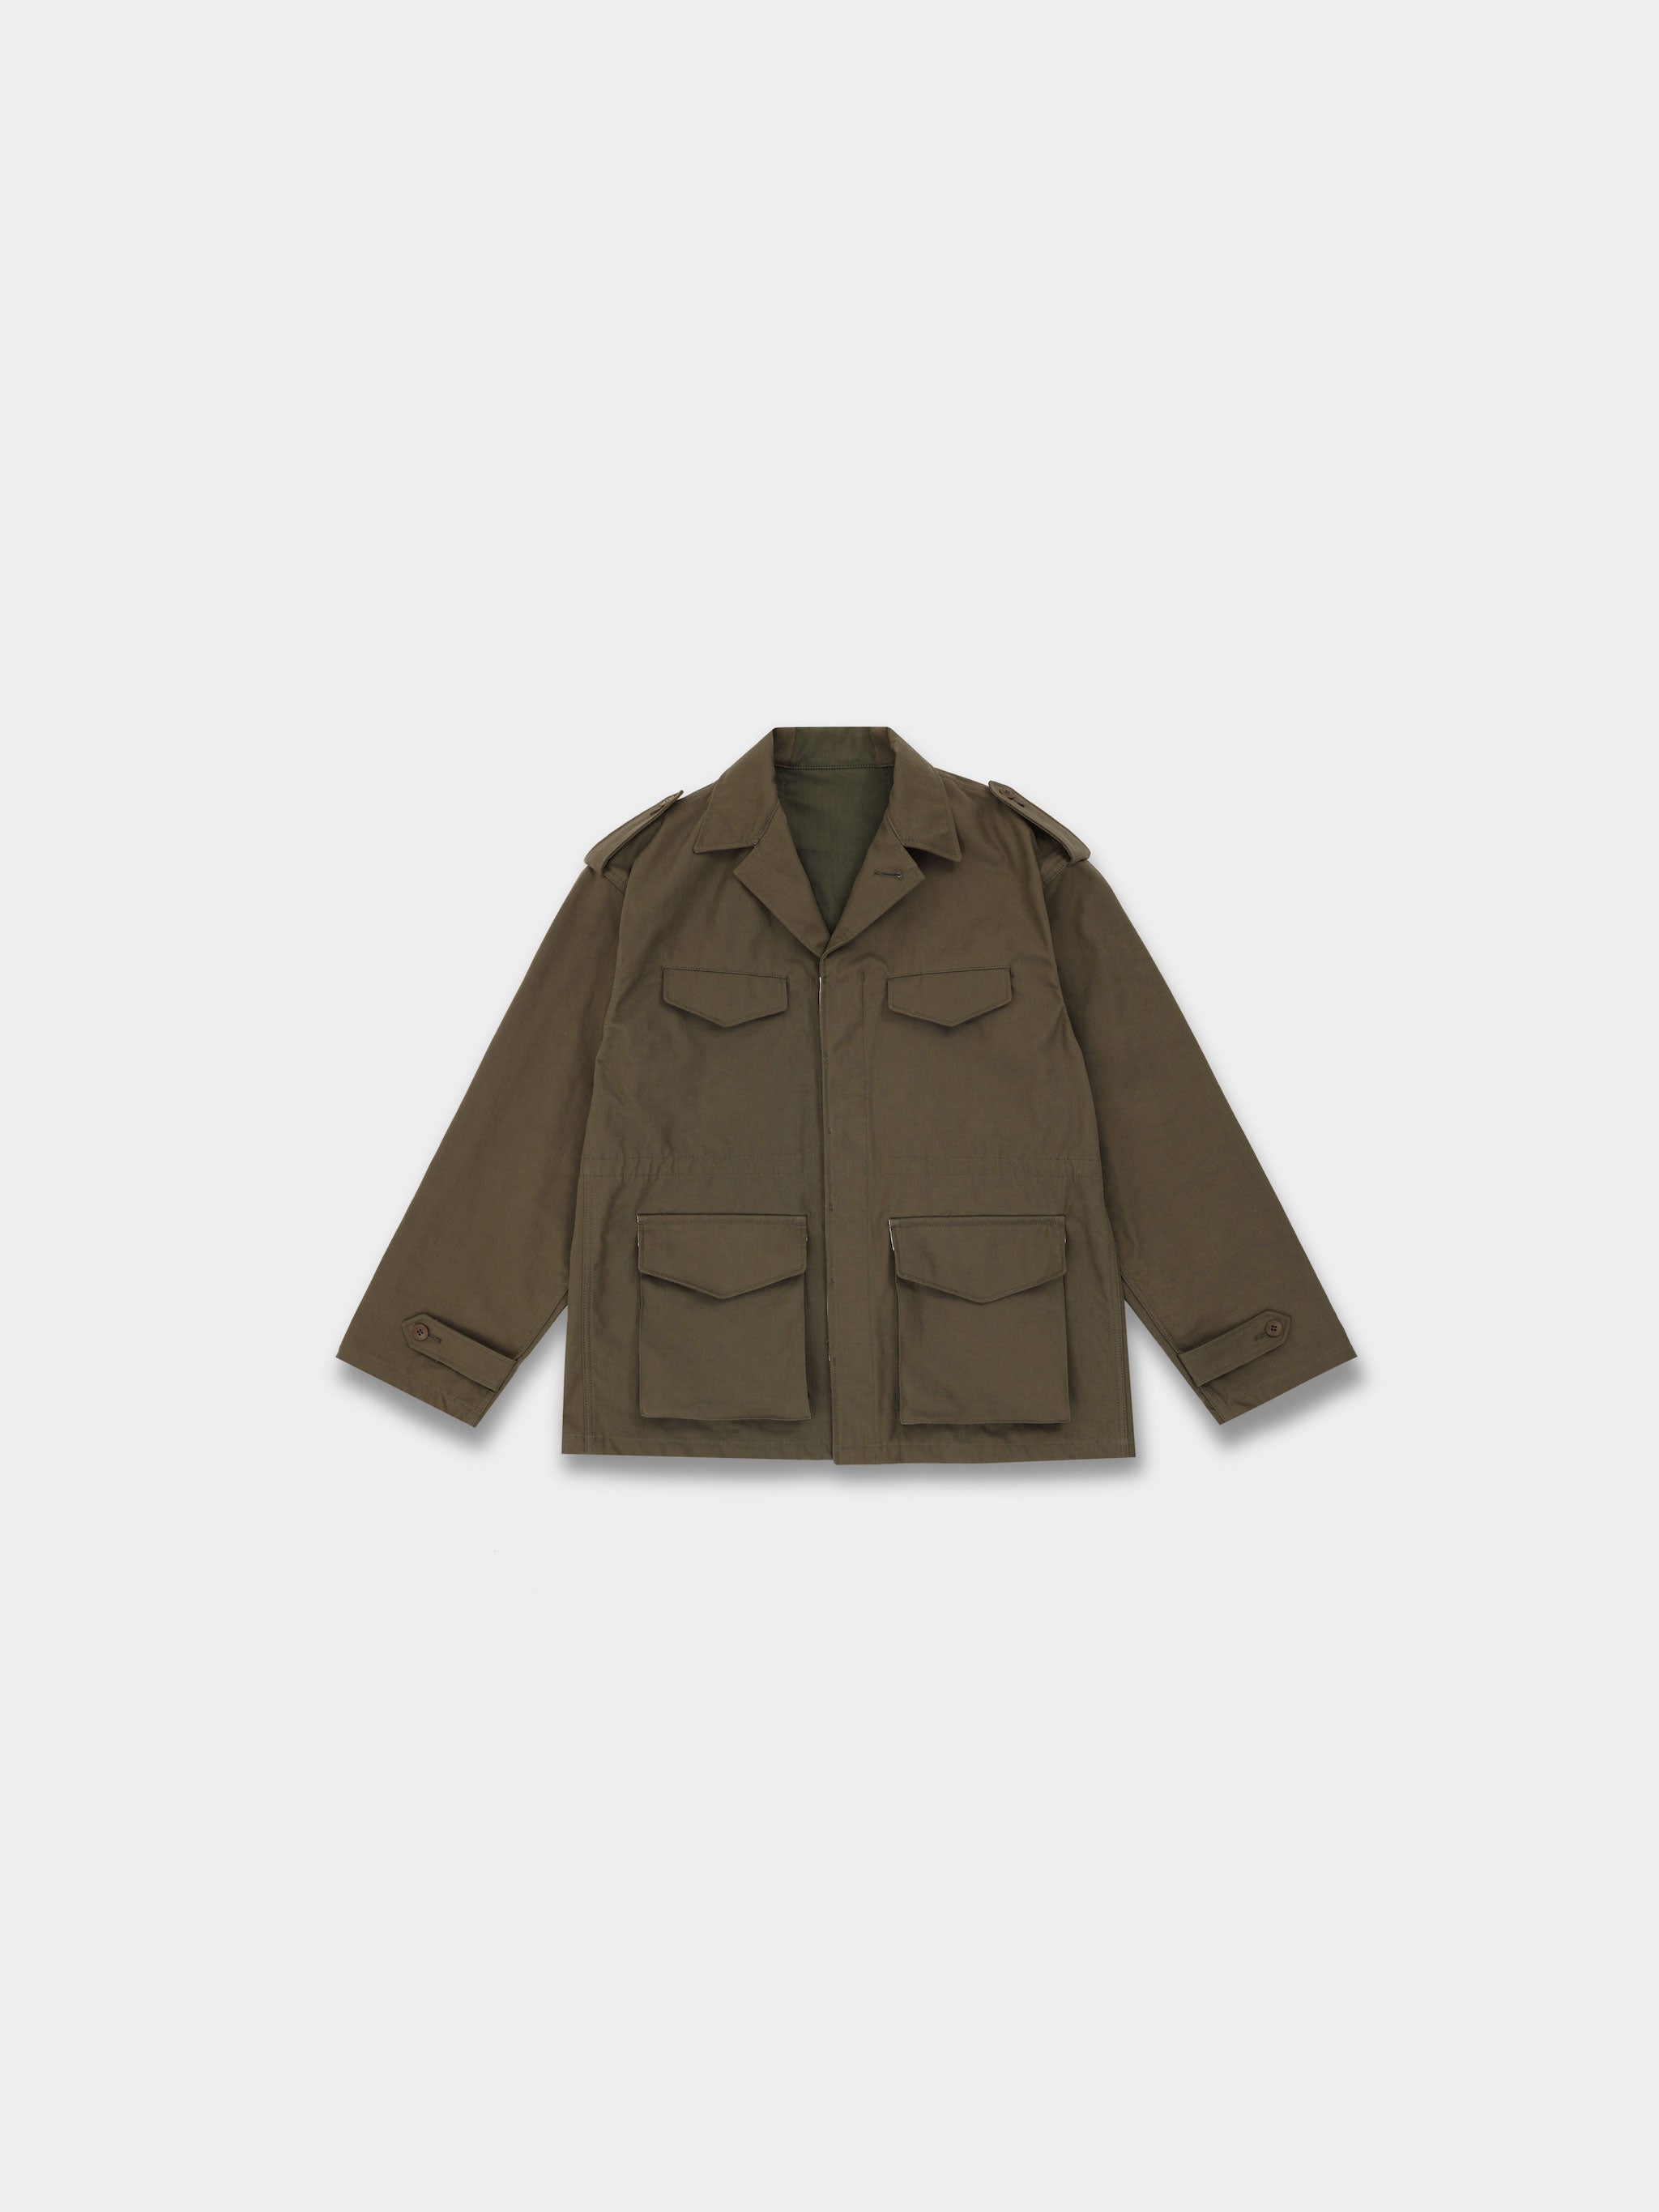 The “Scinder” Military Jacket